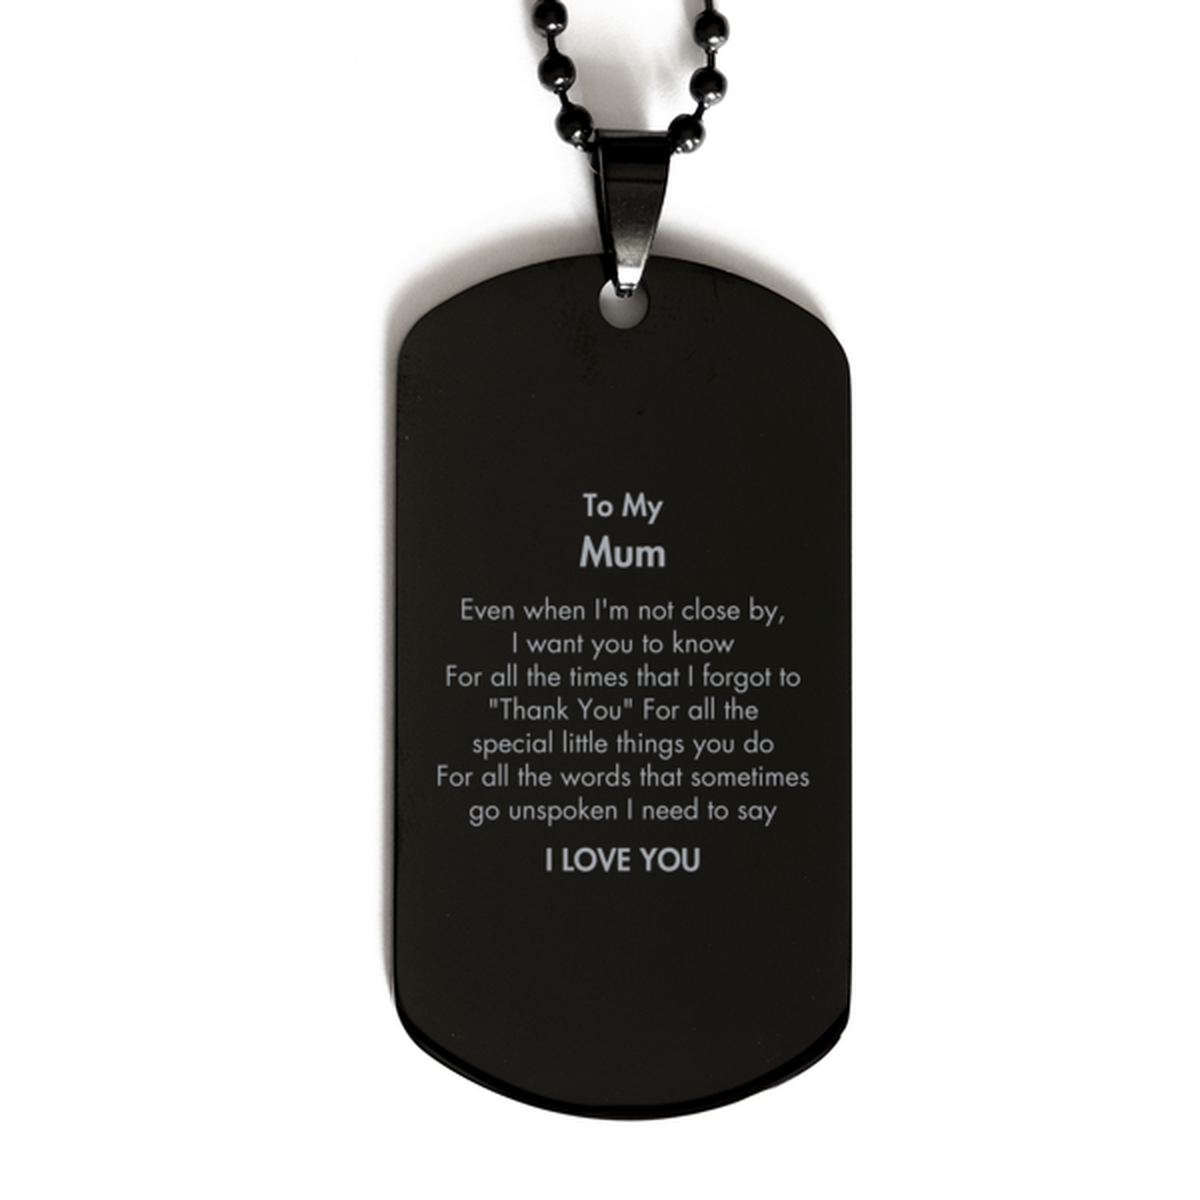 Thank You Gifts for Mum, Keepsake Black Dog Tag Gifts for Mum Birthday Mother's day Father's Day Mum For all the words That sometimes go unspoken I need to say I LOVE YOU